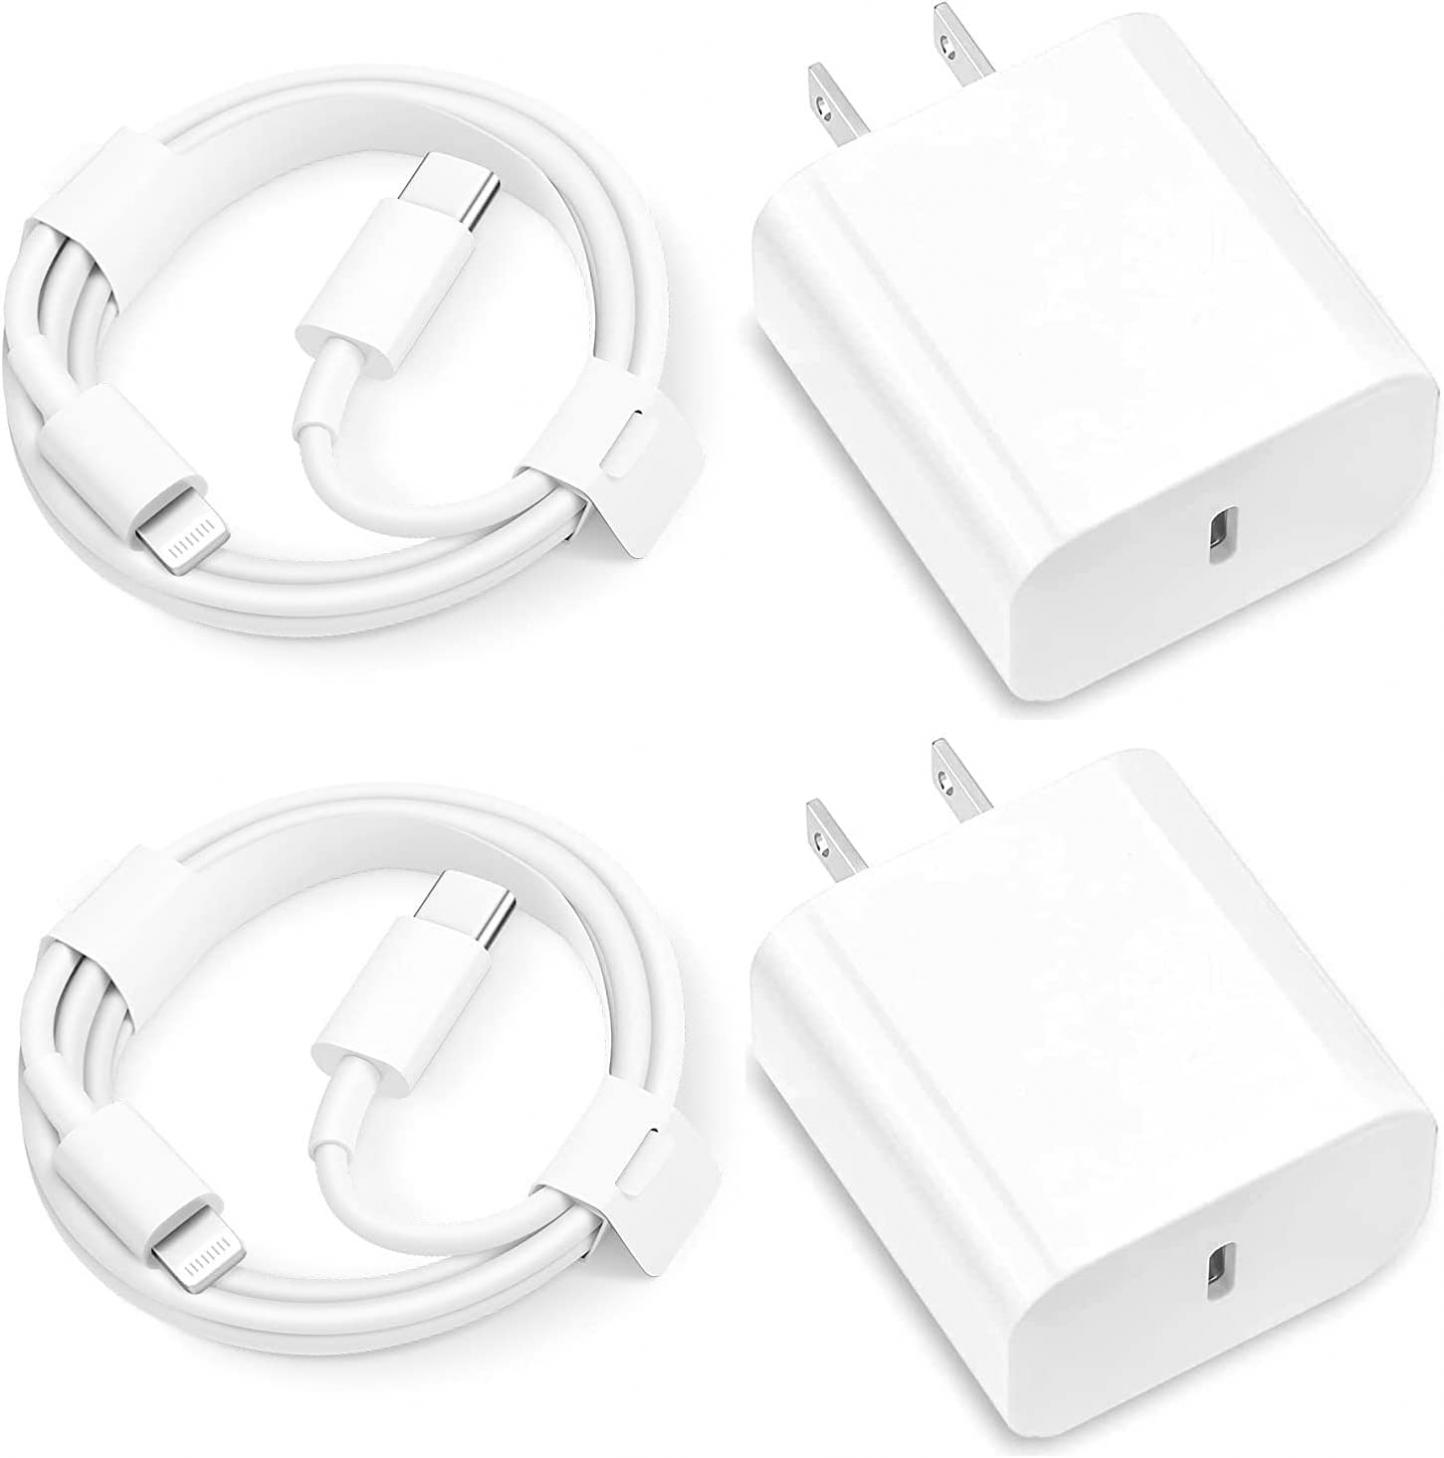 2 Pack iPhone Fast Charger [Apple MFi Certified] 20W 9V/2A PD Adapter with 6FT USB C to Lightning Cable Wall Charger Block Compatible with iPhone 14/13/12/11 Pro Max Xs/XR/X/7/8 Plus iPad Pro